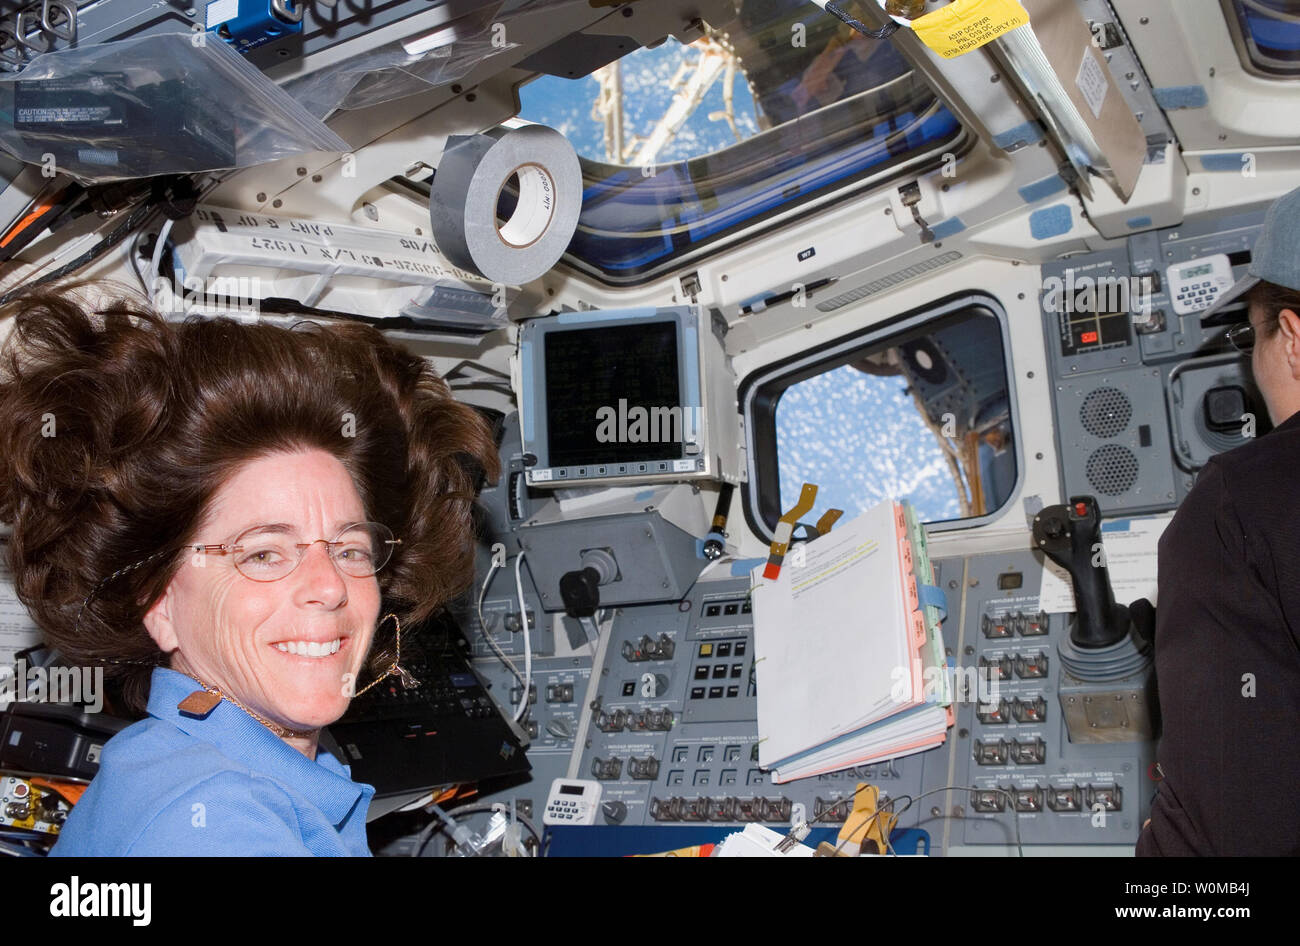 A NASA photo shows teacher/astronaut Barbara R. Morgan on the Space Shuttle Endeavor as it is docked with the International Space Station on August 12, 2007. Morgan transformed the space shuttle and space station into a classroom on August 14 for her first education session from orbit, fulfilling the legacy of Christa McAuliffe, the first teacher/astronaut who was aboard the doomed 1986 Challenger flight. (UPI Photo/NASA) Stock Photo